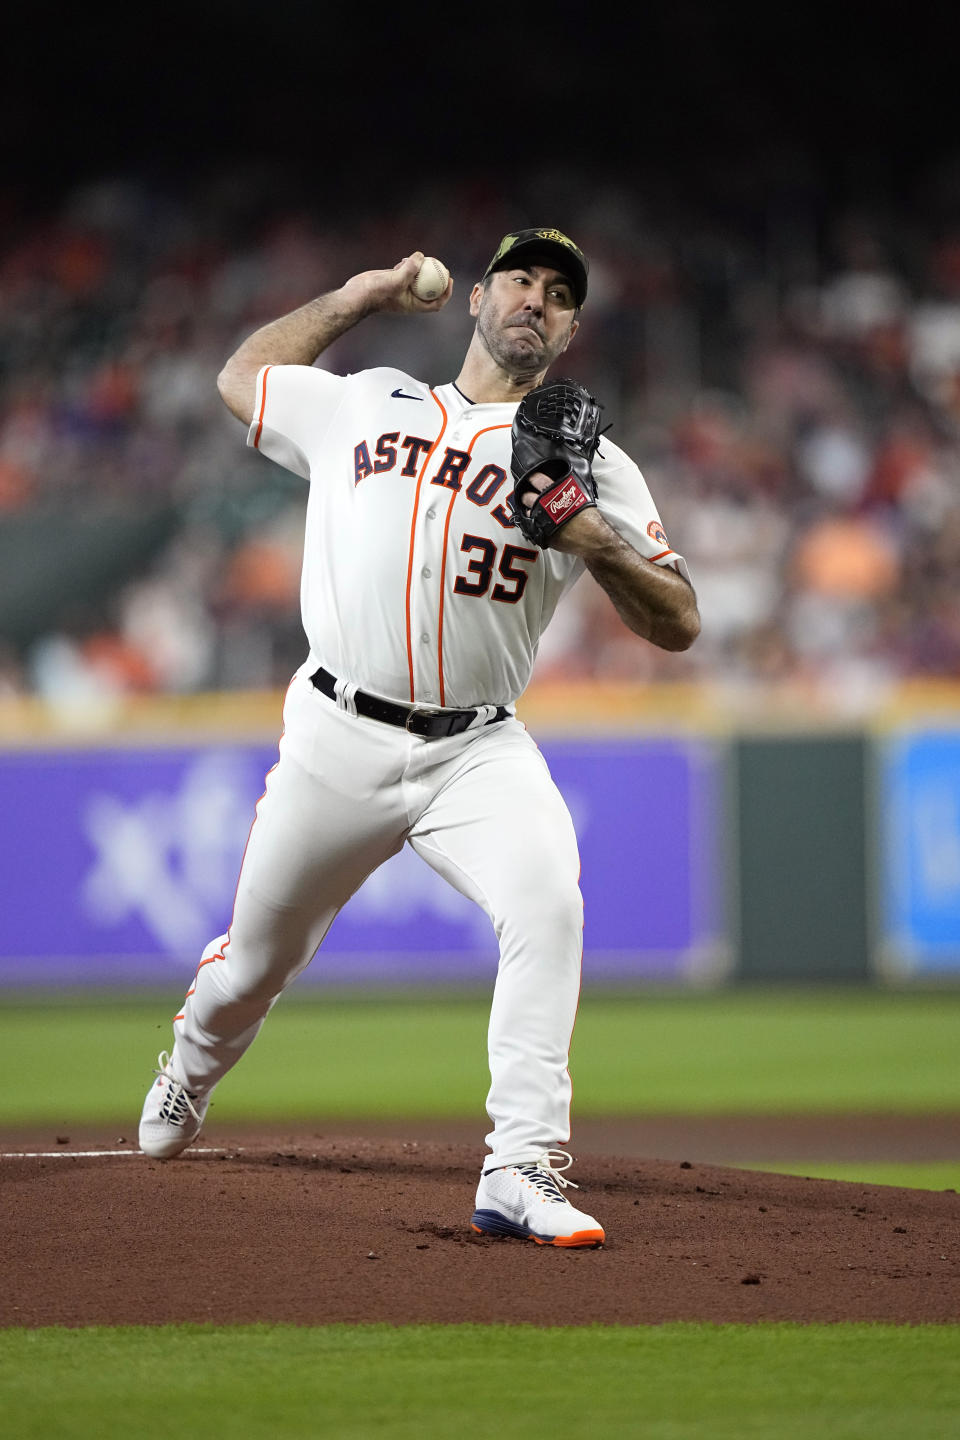 Houston Astros starting pitcher Justin Verlander throws during the first inning of a baseball game against the Texas Rangers Saturday, May 21, 2022, in Houston. (AP Photo/David J. Phillip)